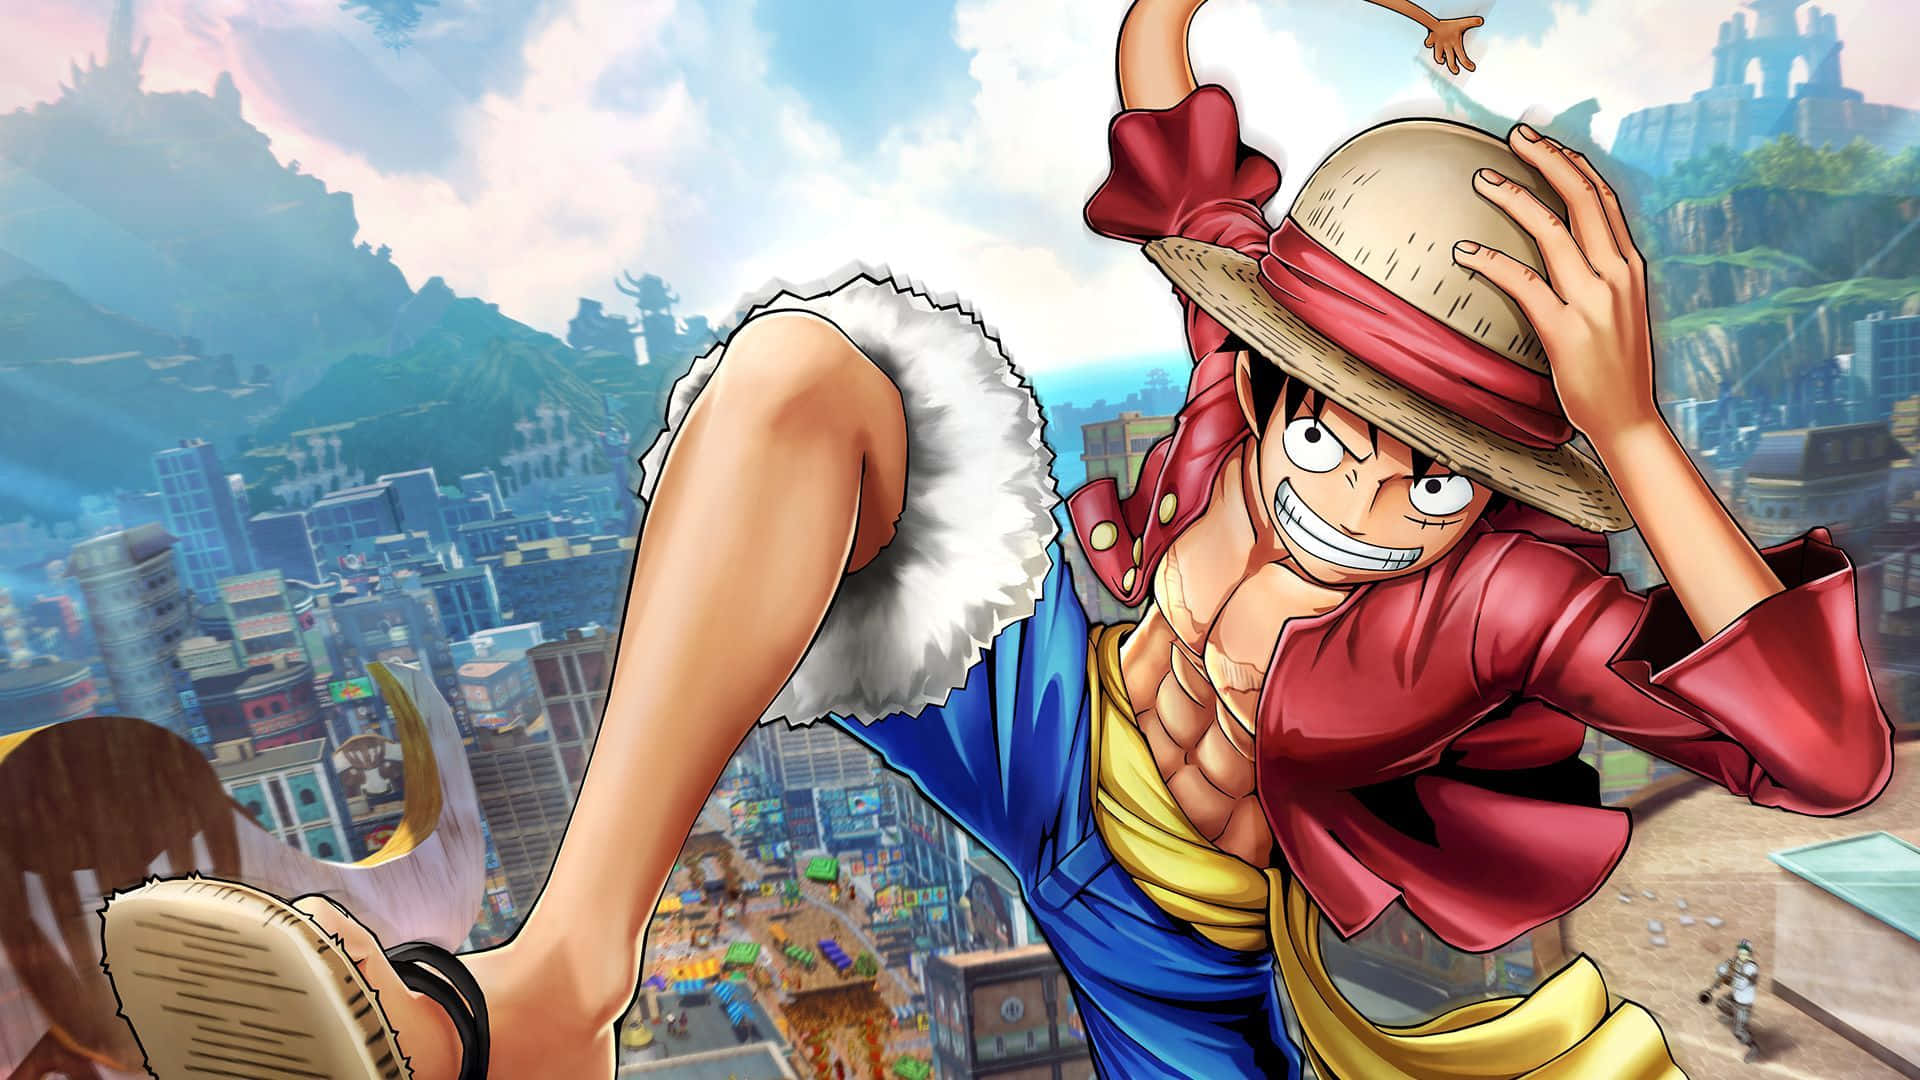 Download Ps4 Anime One Piece Wallpaper 